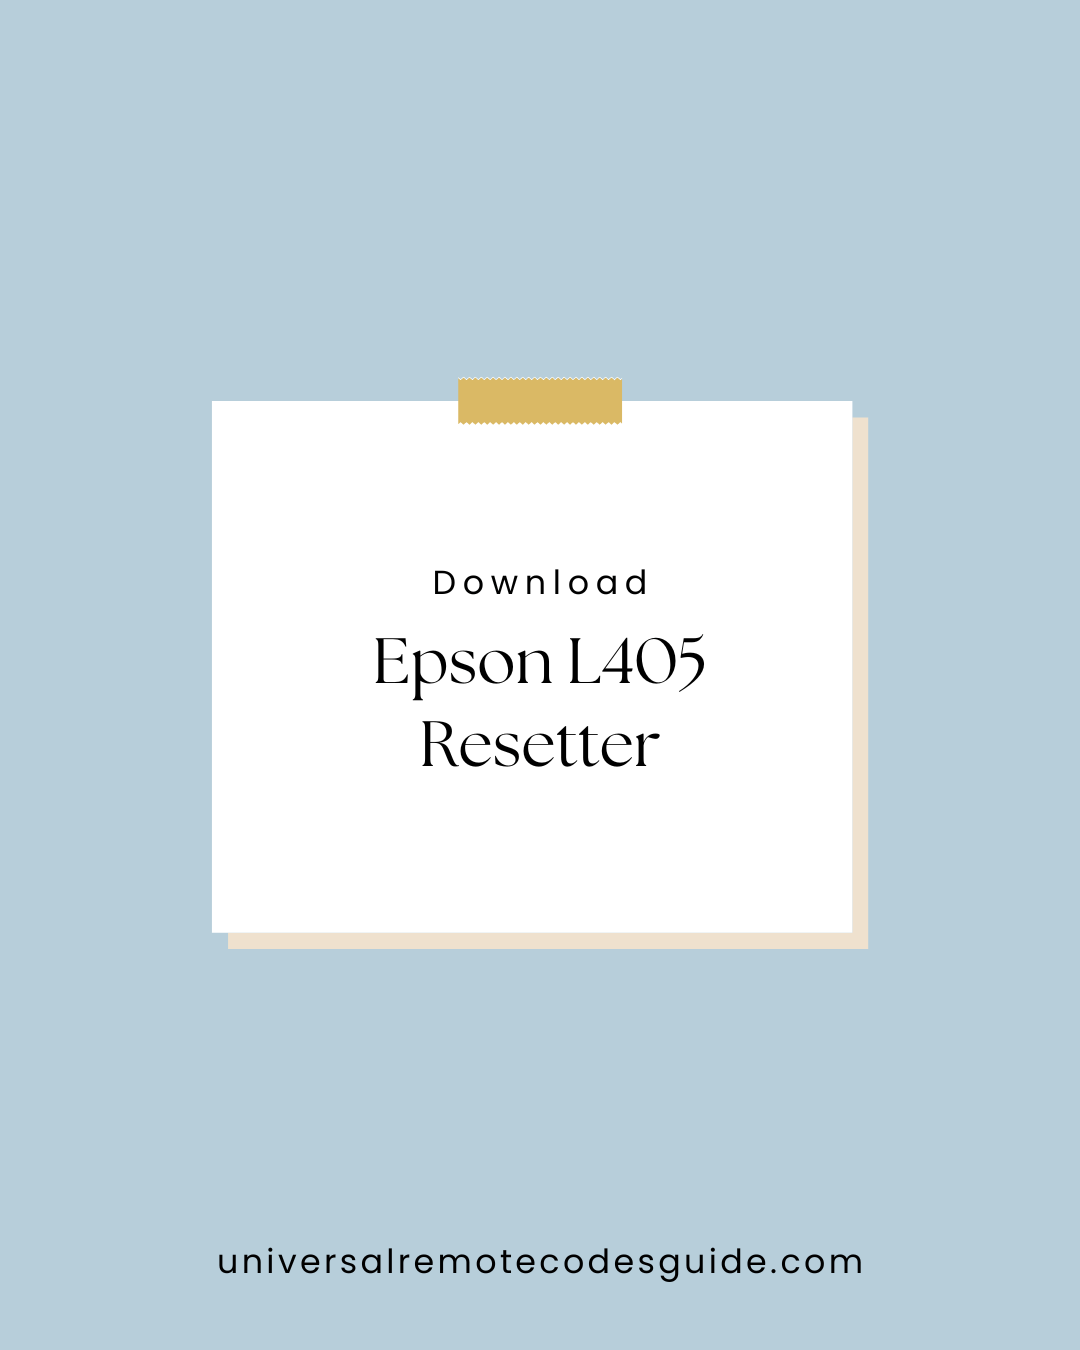 Epson L405 Resetter Download